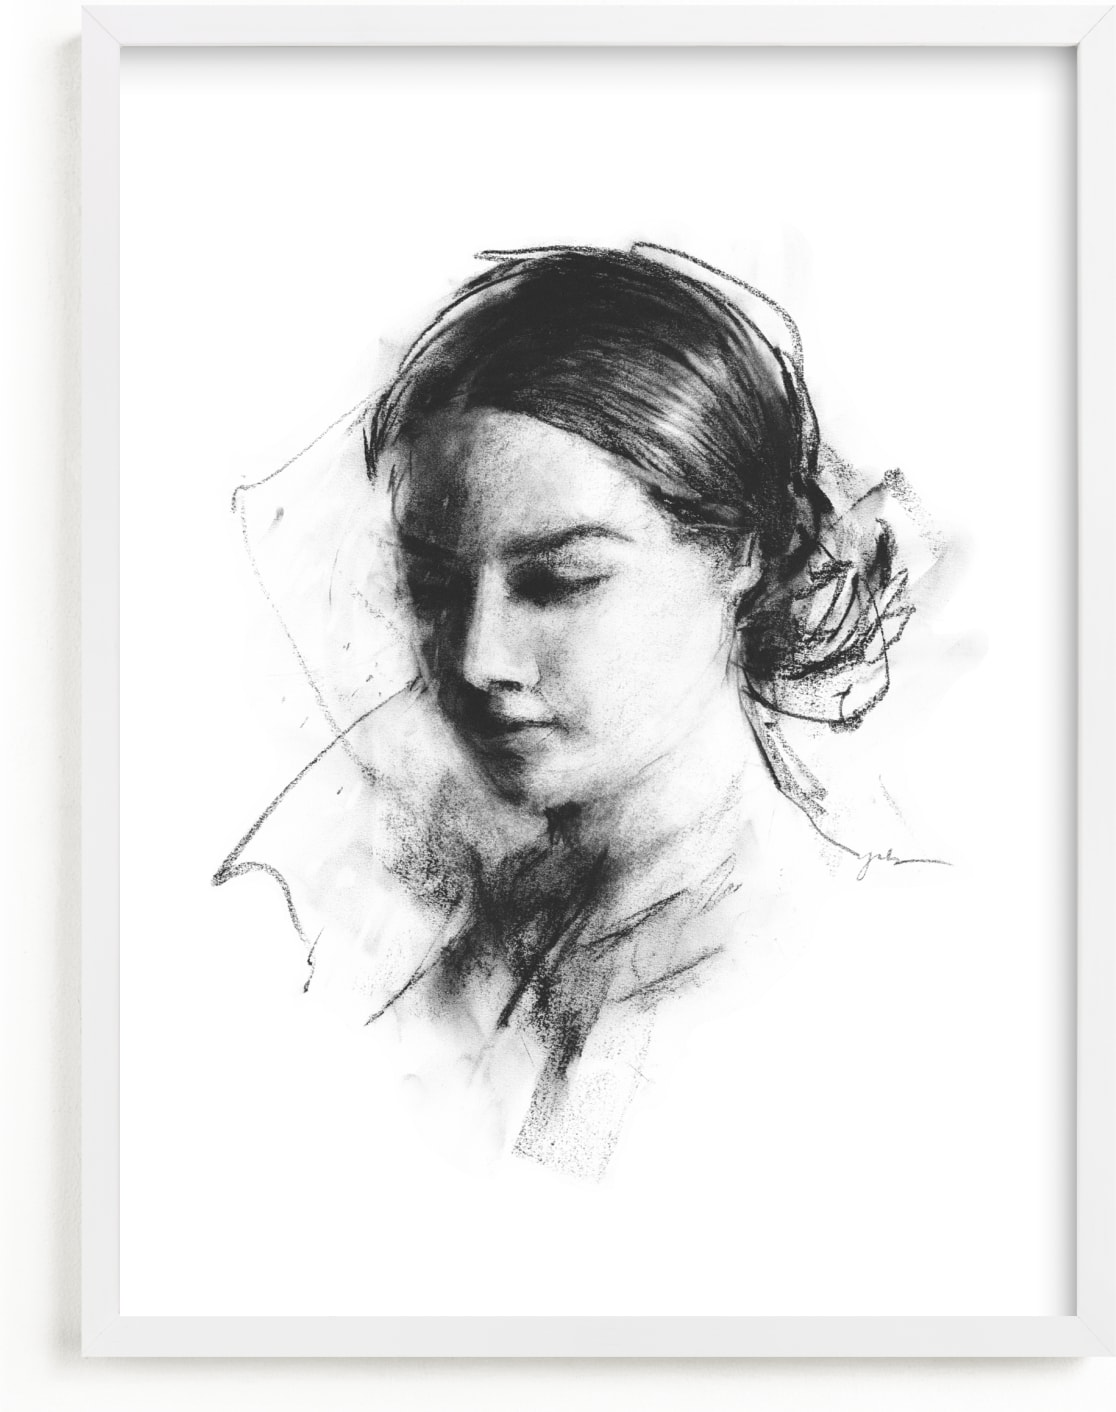 This is a black and white art by Jess Blazejewski called Rebecca.